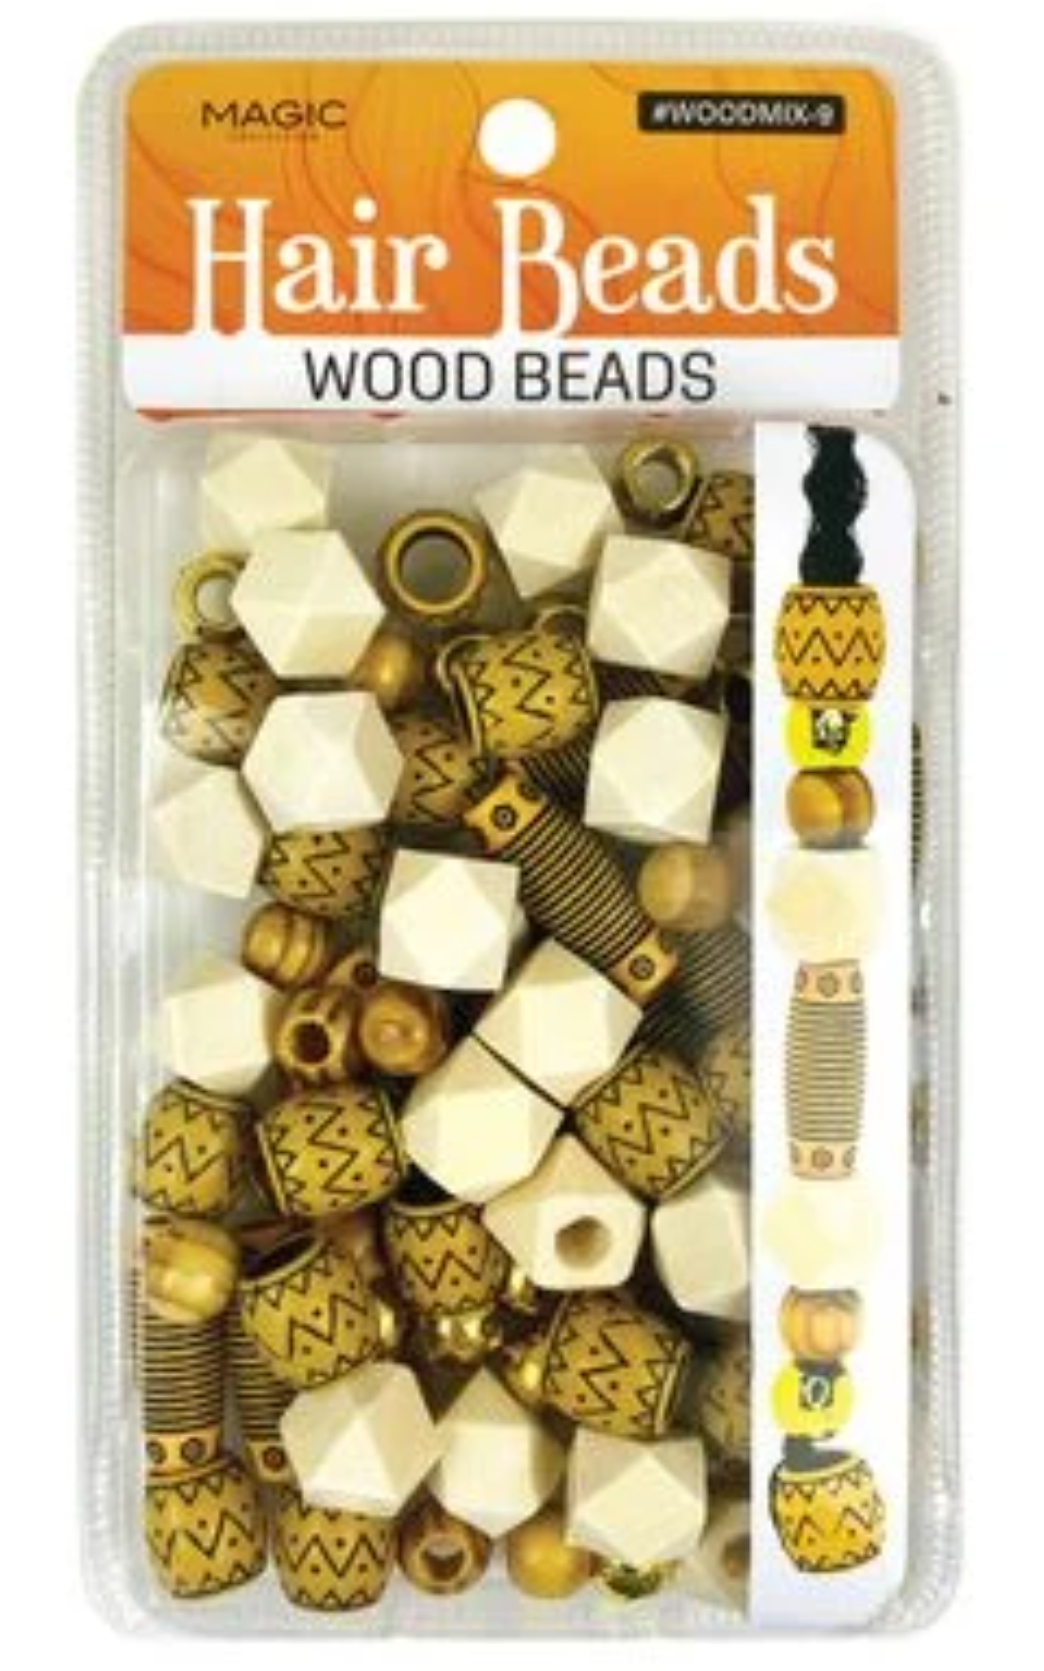 100 Pcs Afrian Wood Beads for Hair Assorted Macrame Beads Wooden Craft  Beads for Hair Braids Natural Painted Wooden Hair Beads for Women Girls  Boys